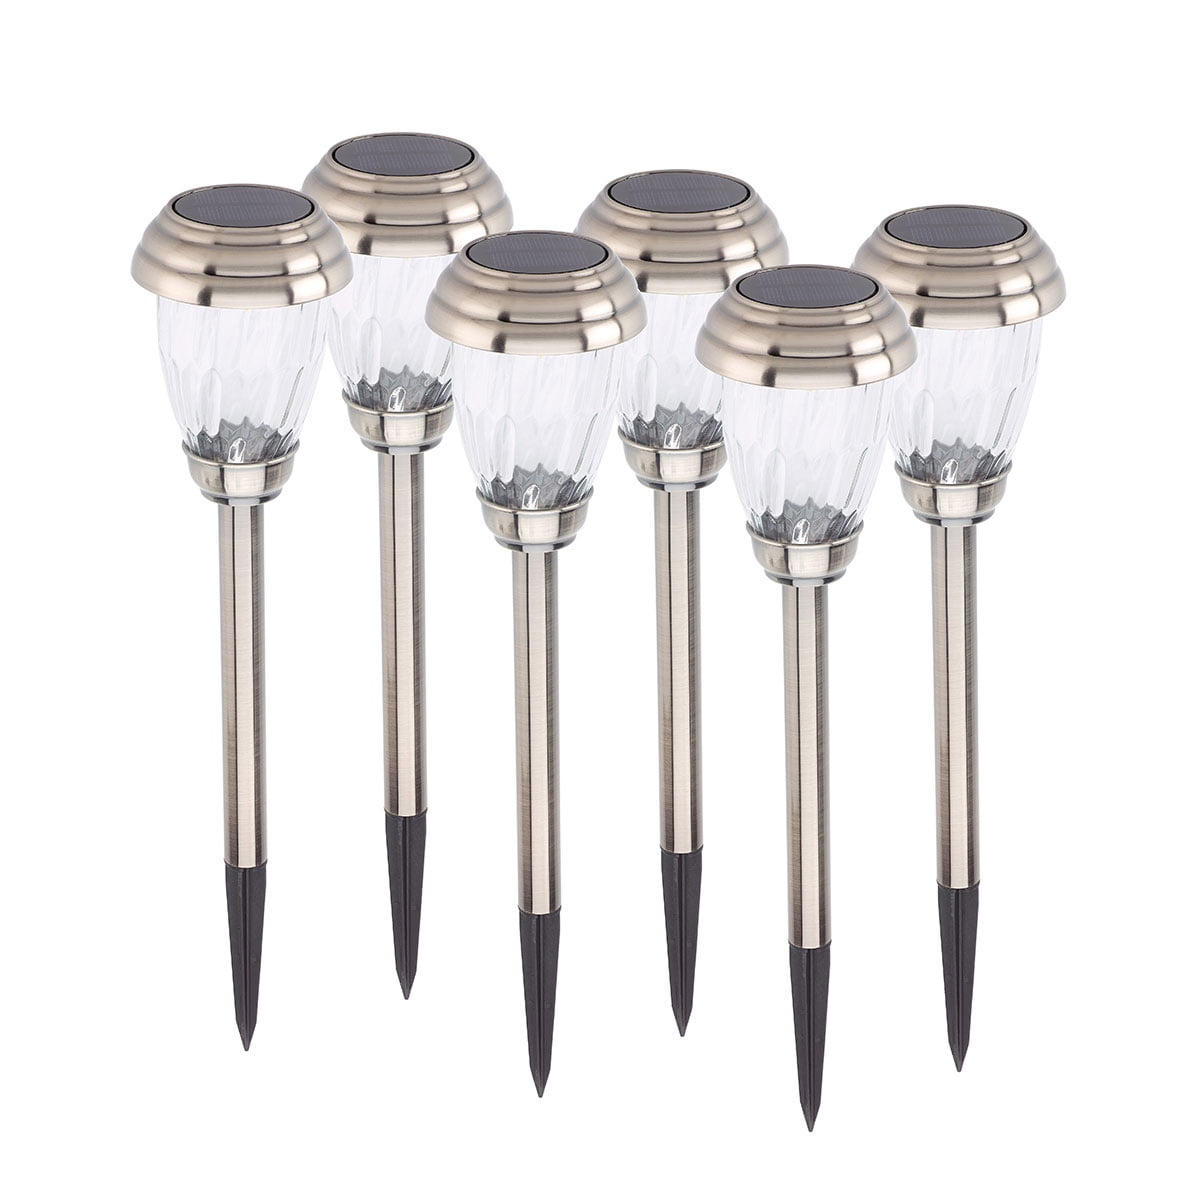 Enchanted Garden stainless steel finish solar accent lights 6 pack new in box